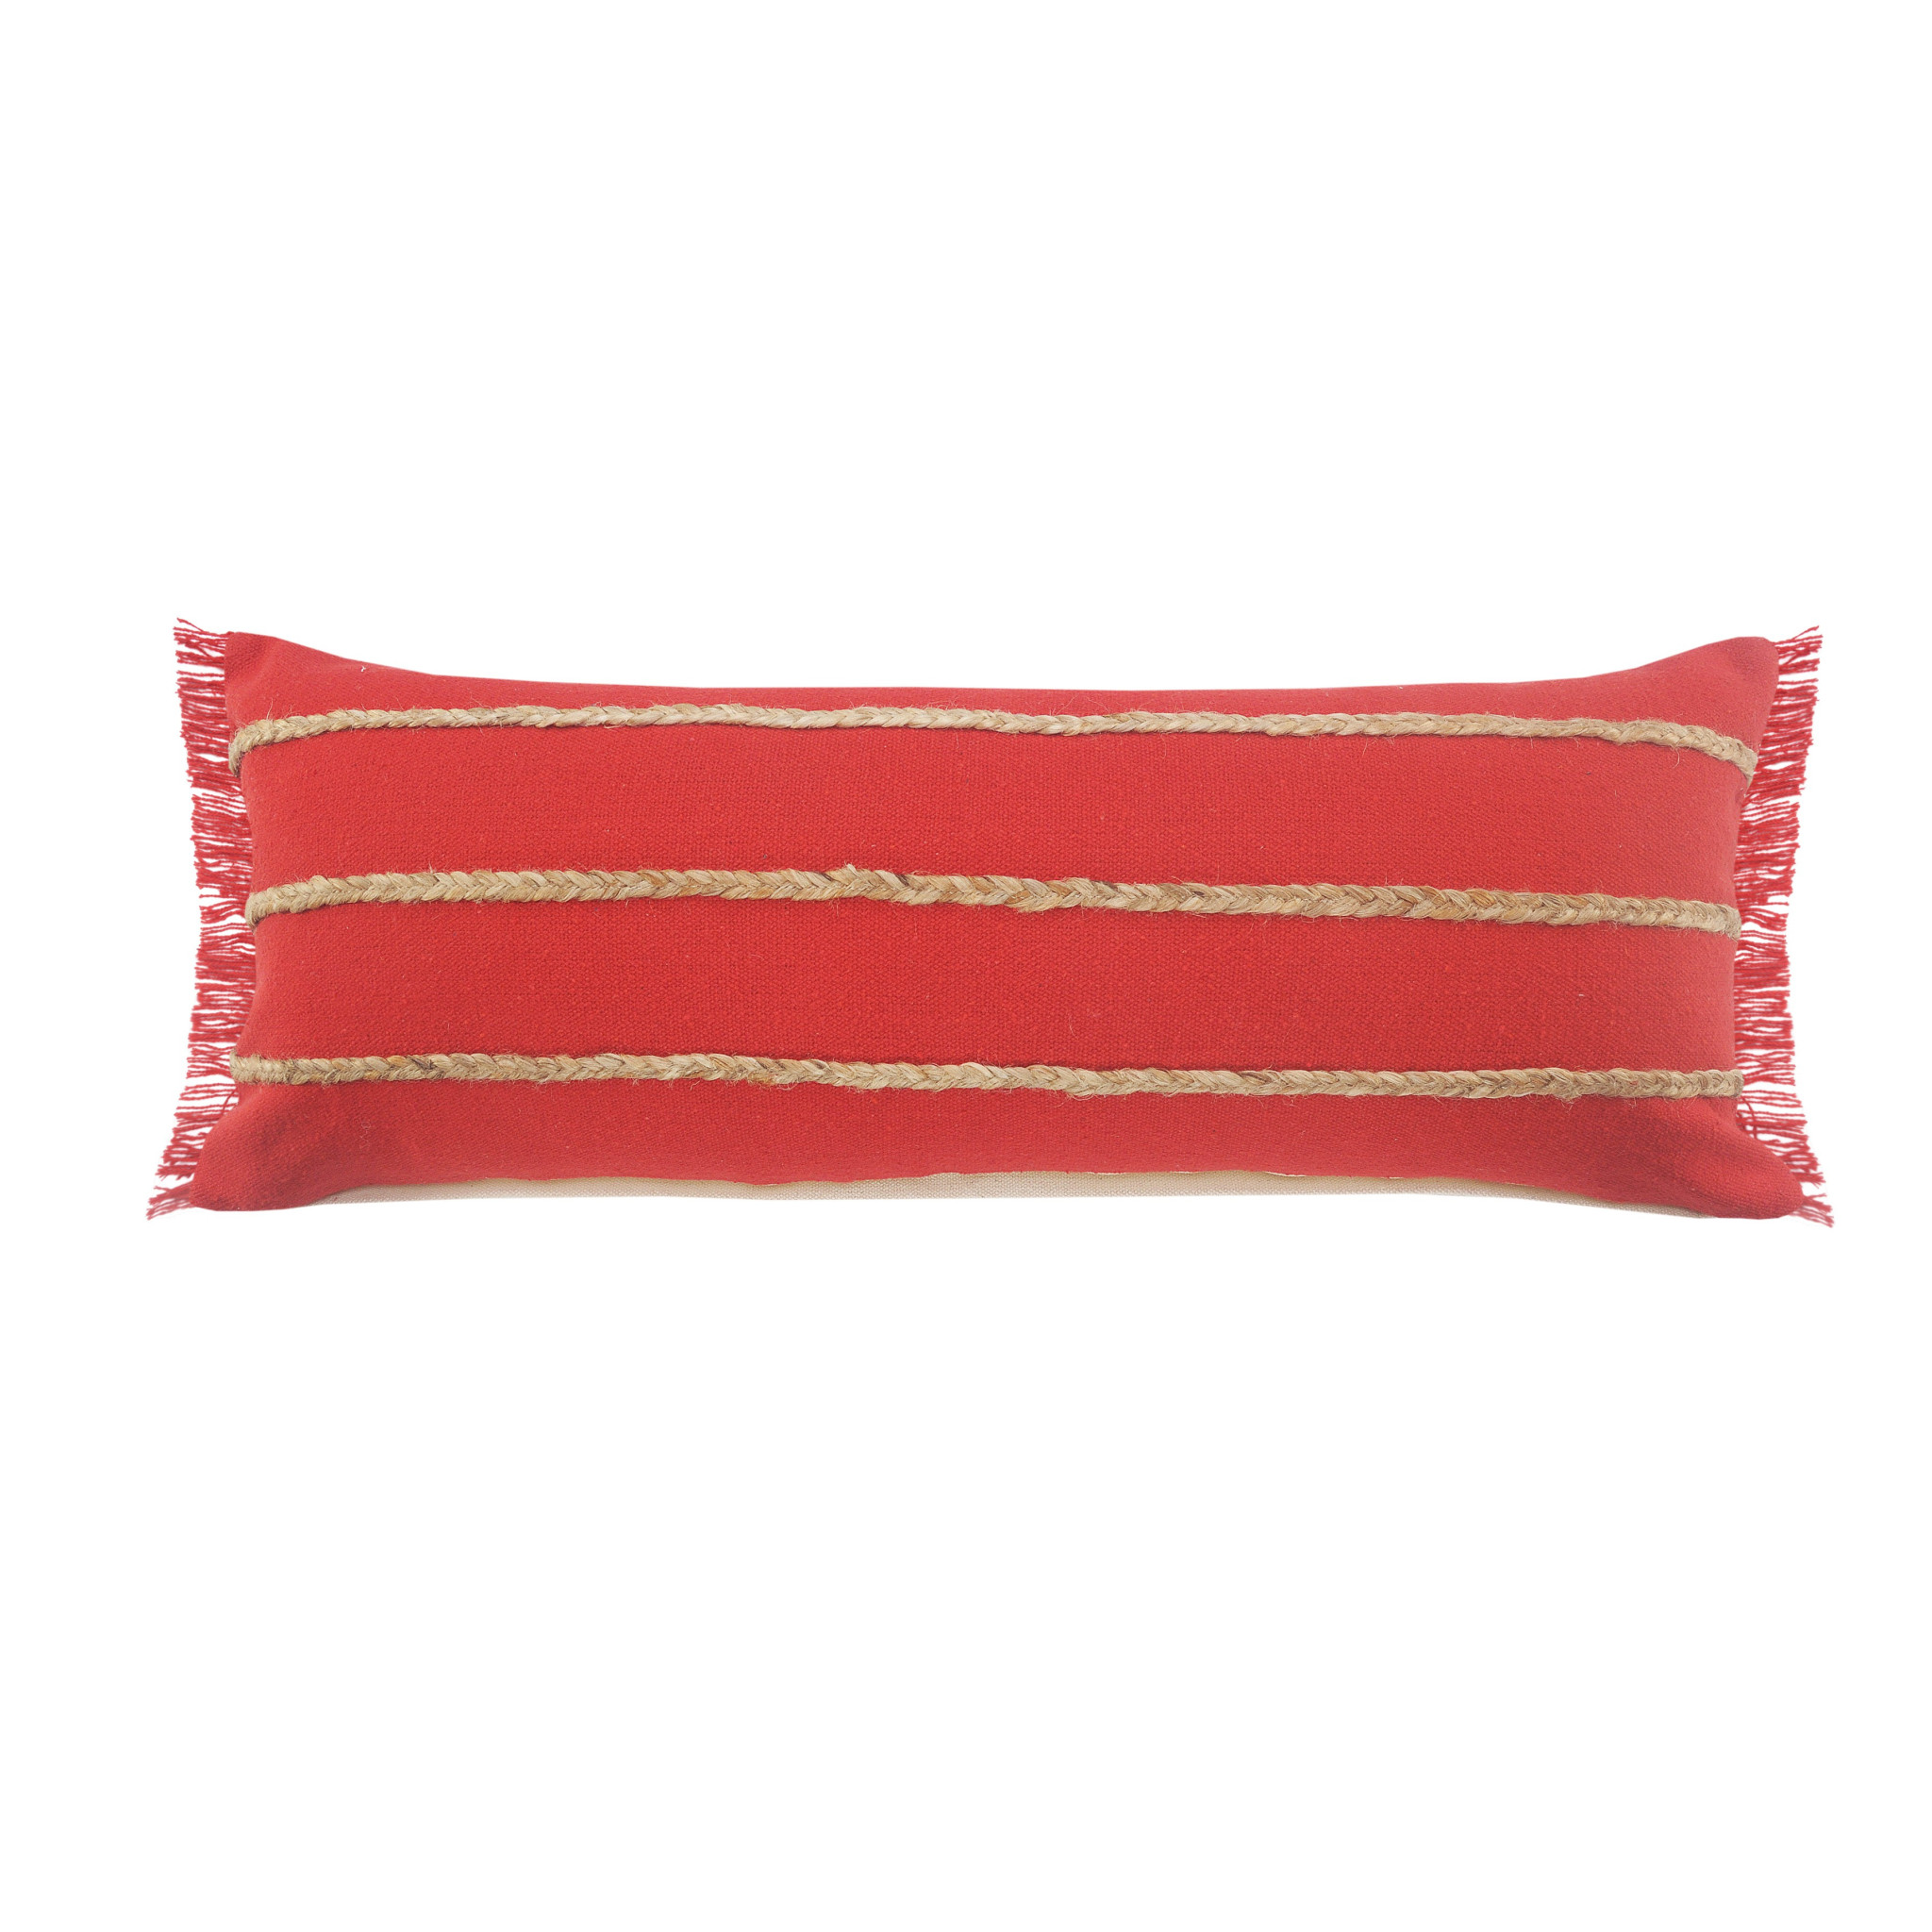 14" X 36" Red And Tan 100% Cotton Zippered Pillow-517270-1